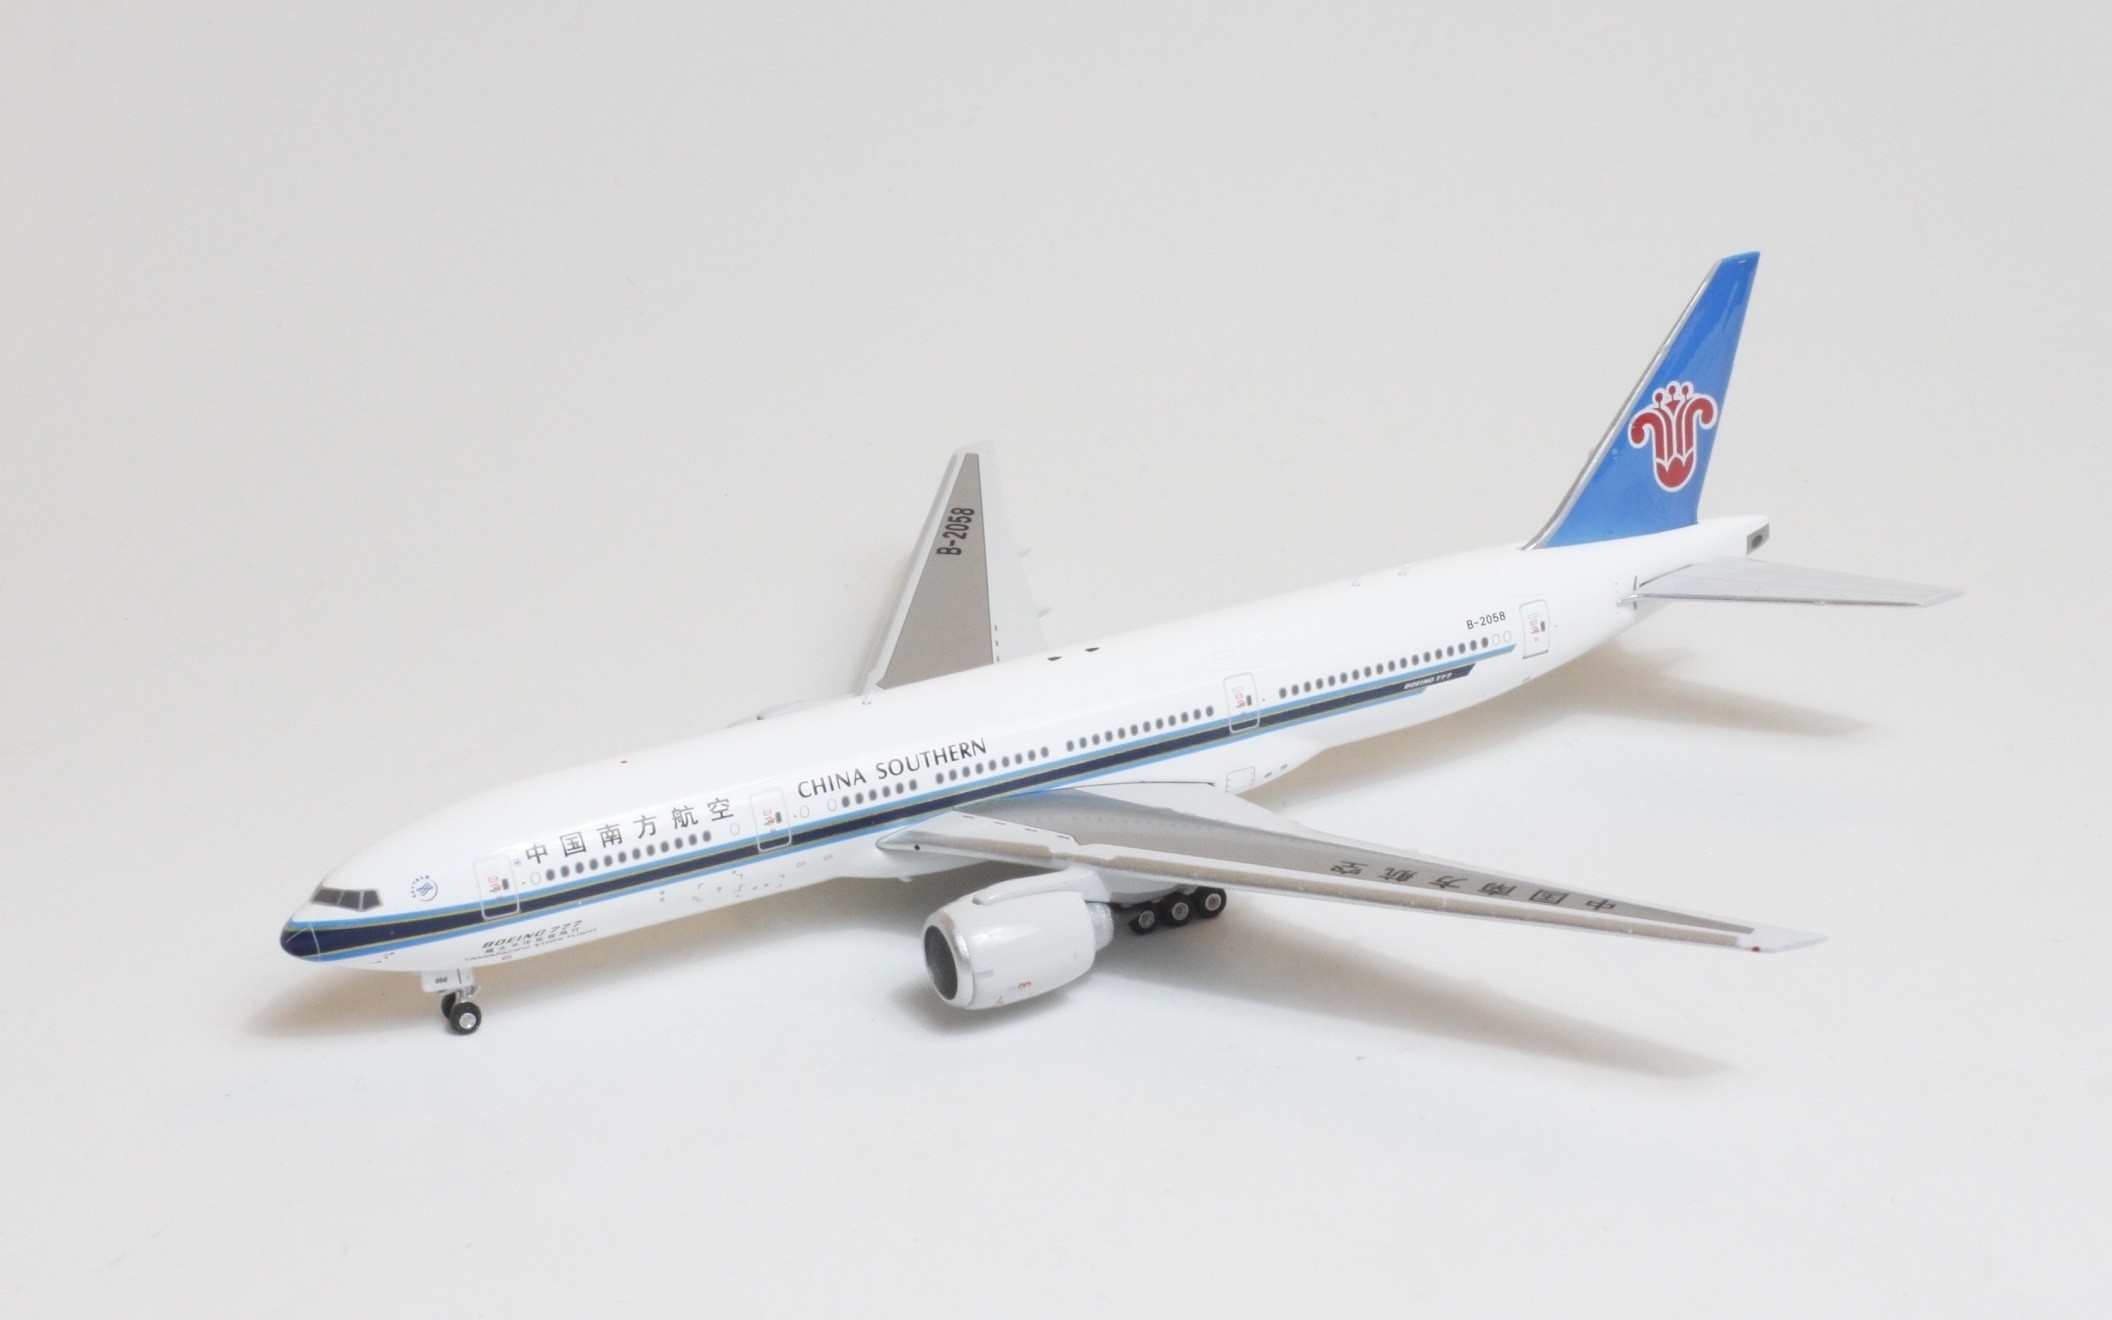 China Southern Boeing 777-200 B-2058 中国南方航空Phoenix 11680 diecast scale  1:400 ezToys Diecast Models and Collectibles